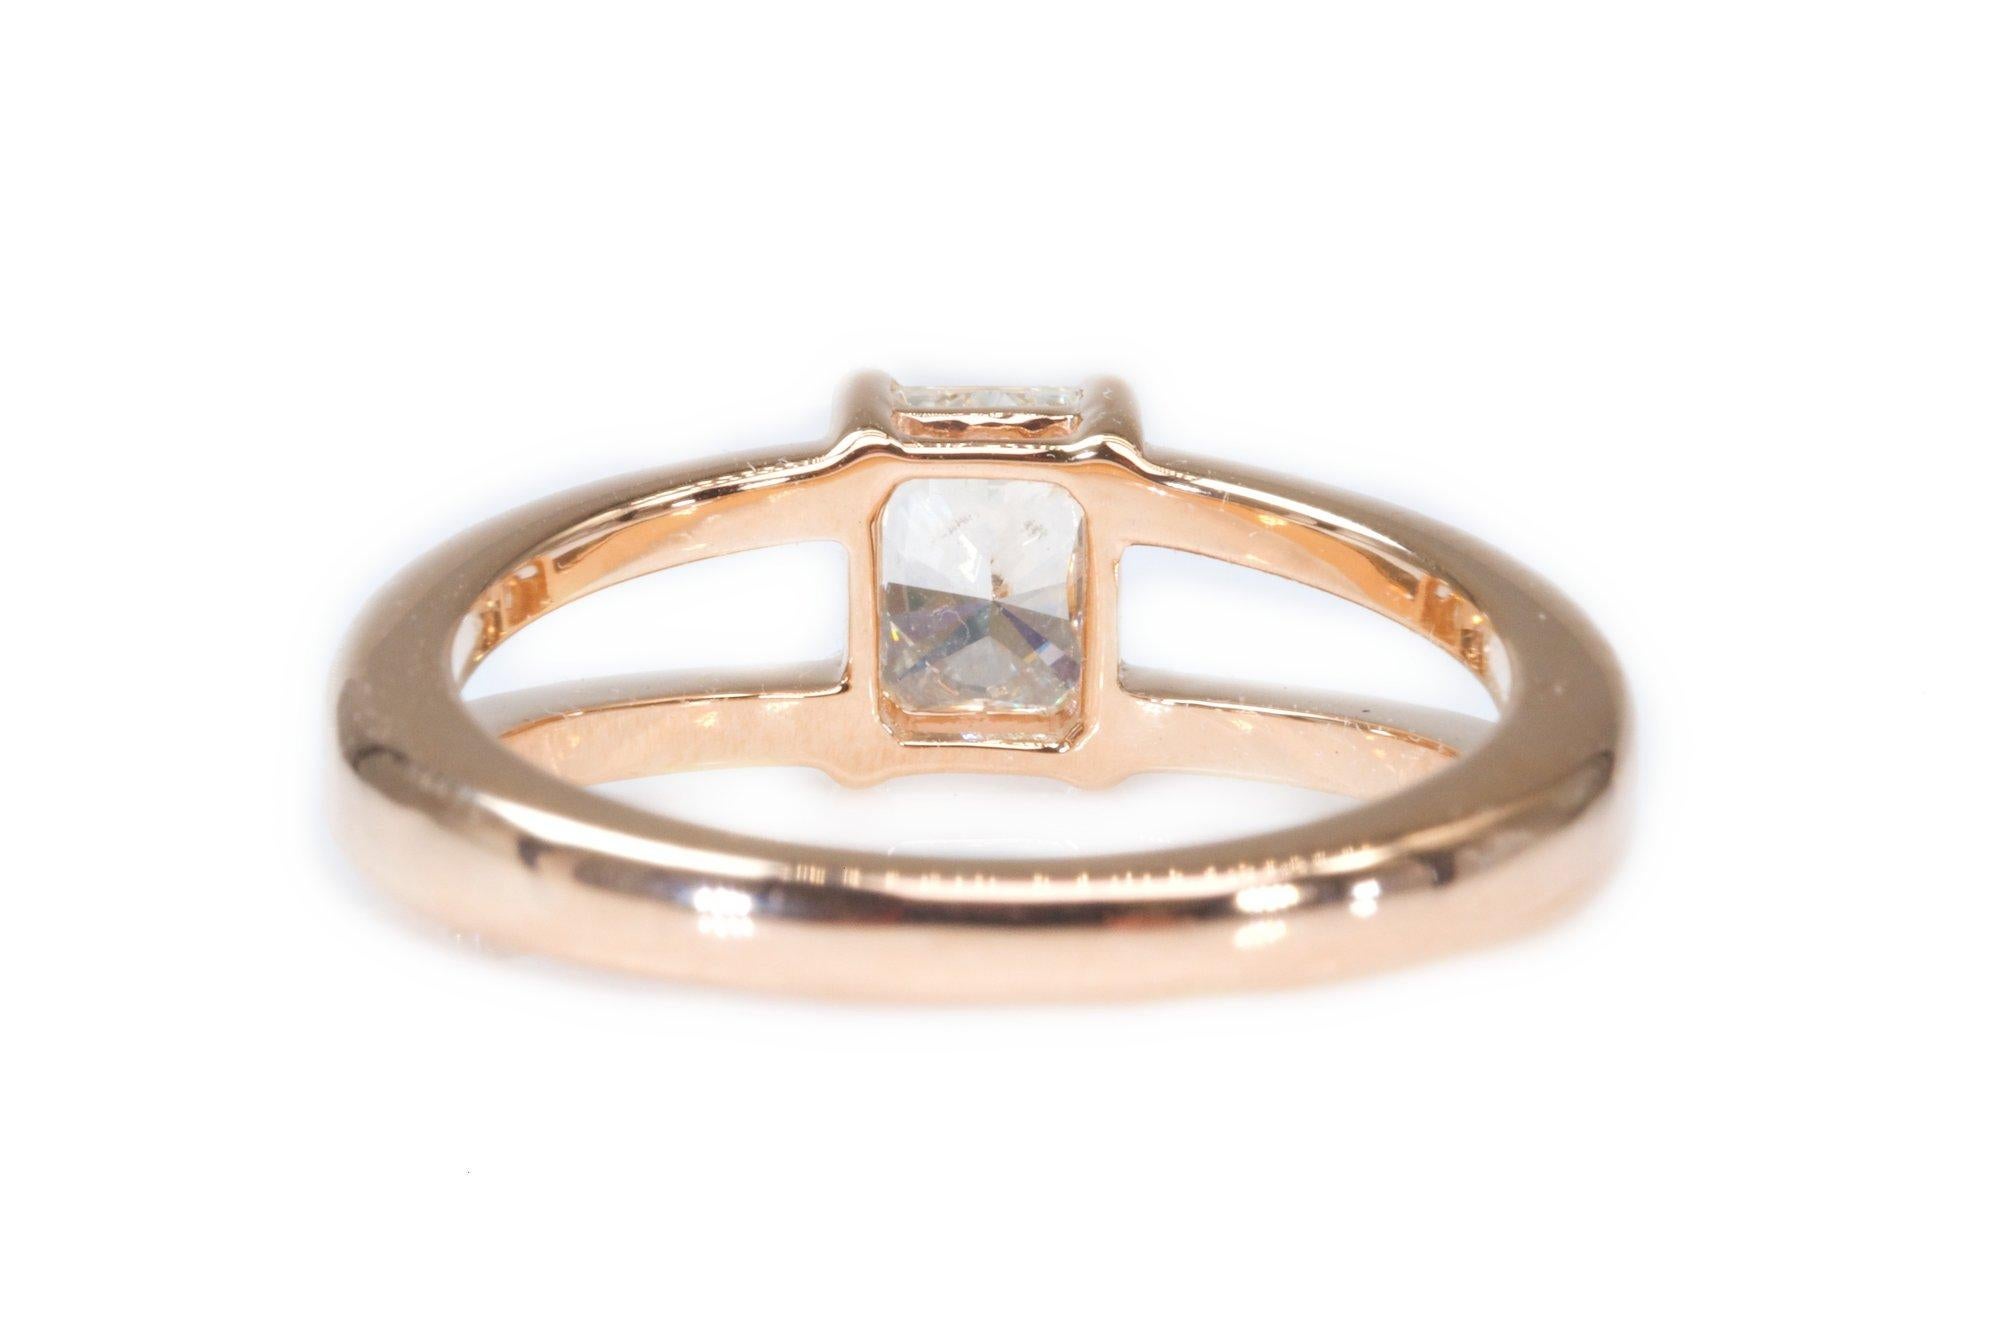 Stunning 18K Rose Gold Ring with 0.50 carat Natural Diamond- GIA Certificate For Sale 3